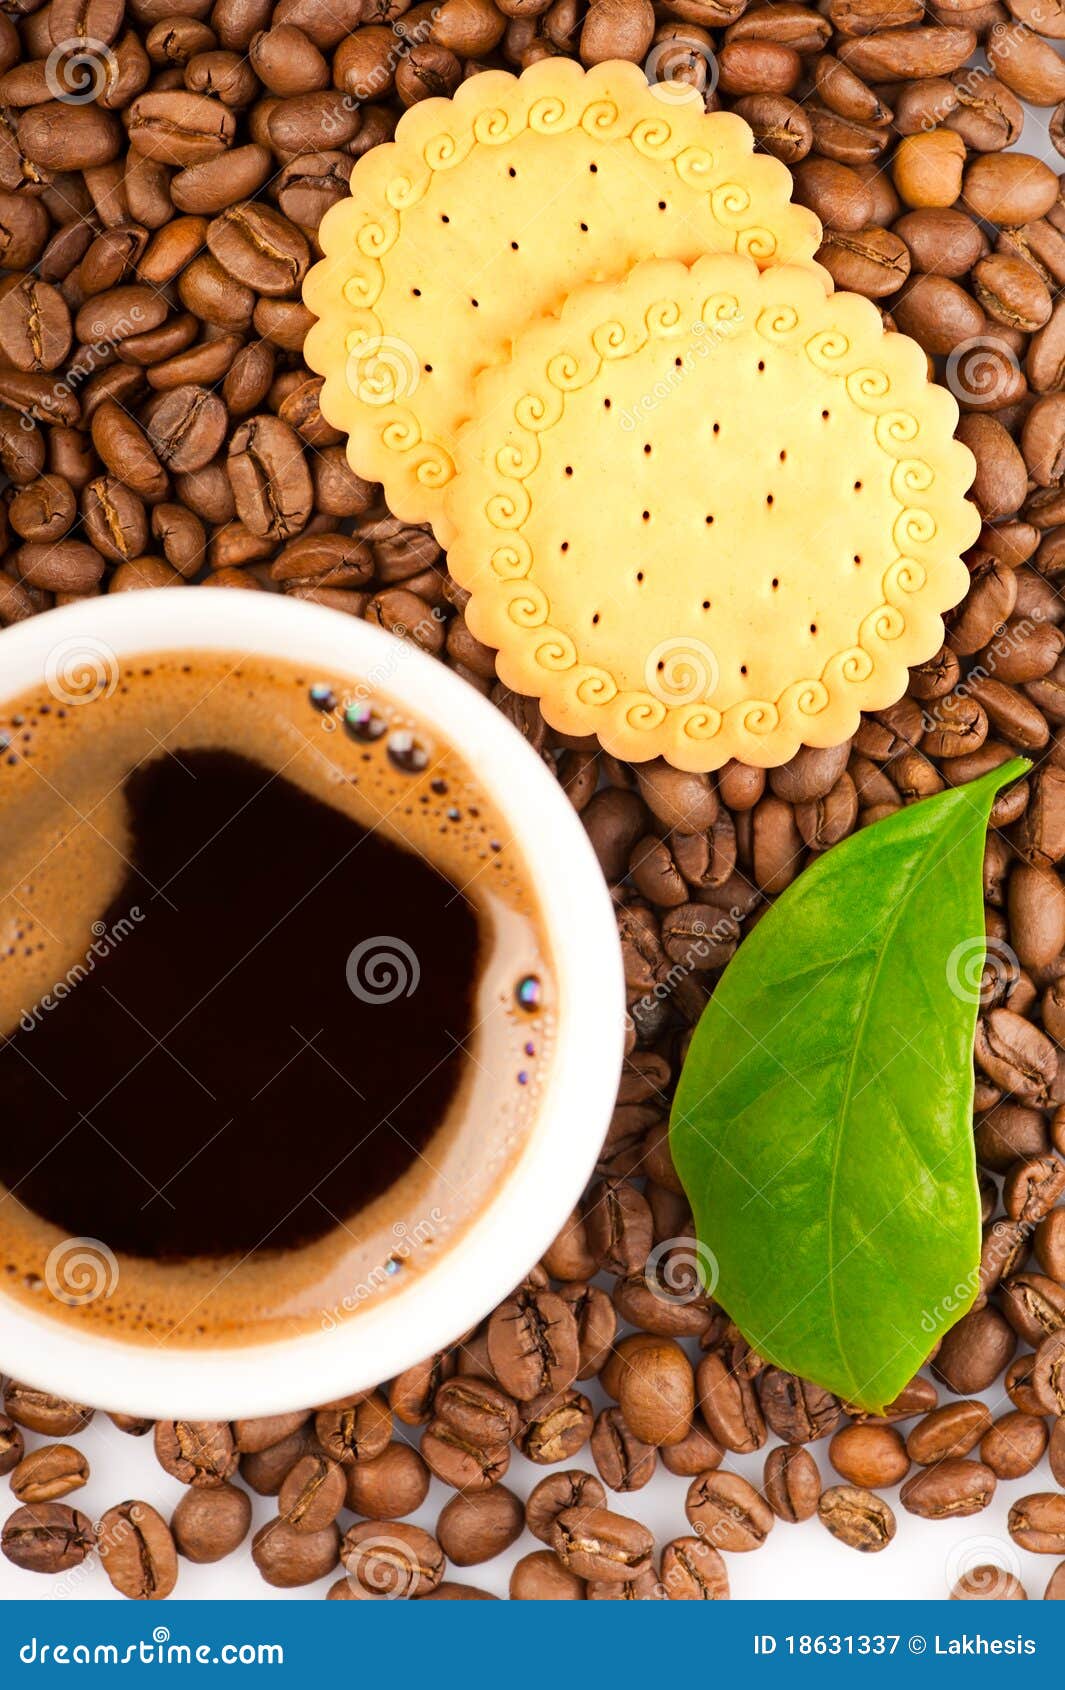 Coffee beans, green leaf of coffee plant with cookies and cup of coffee. Focus on beans